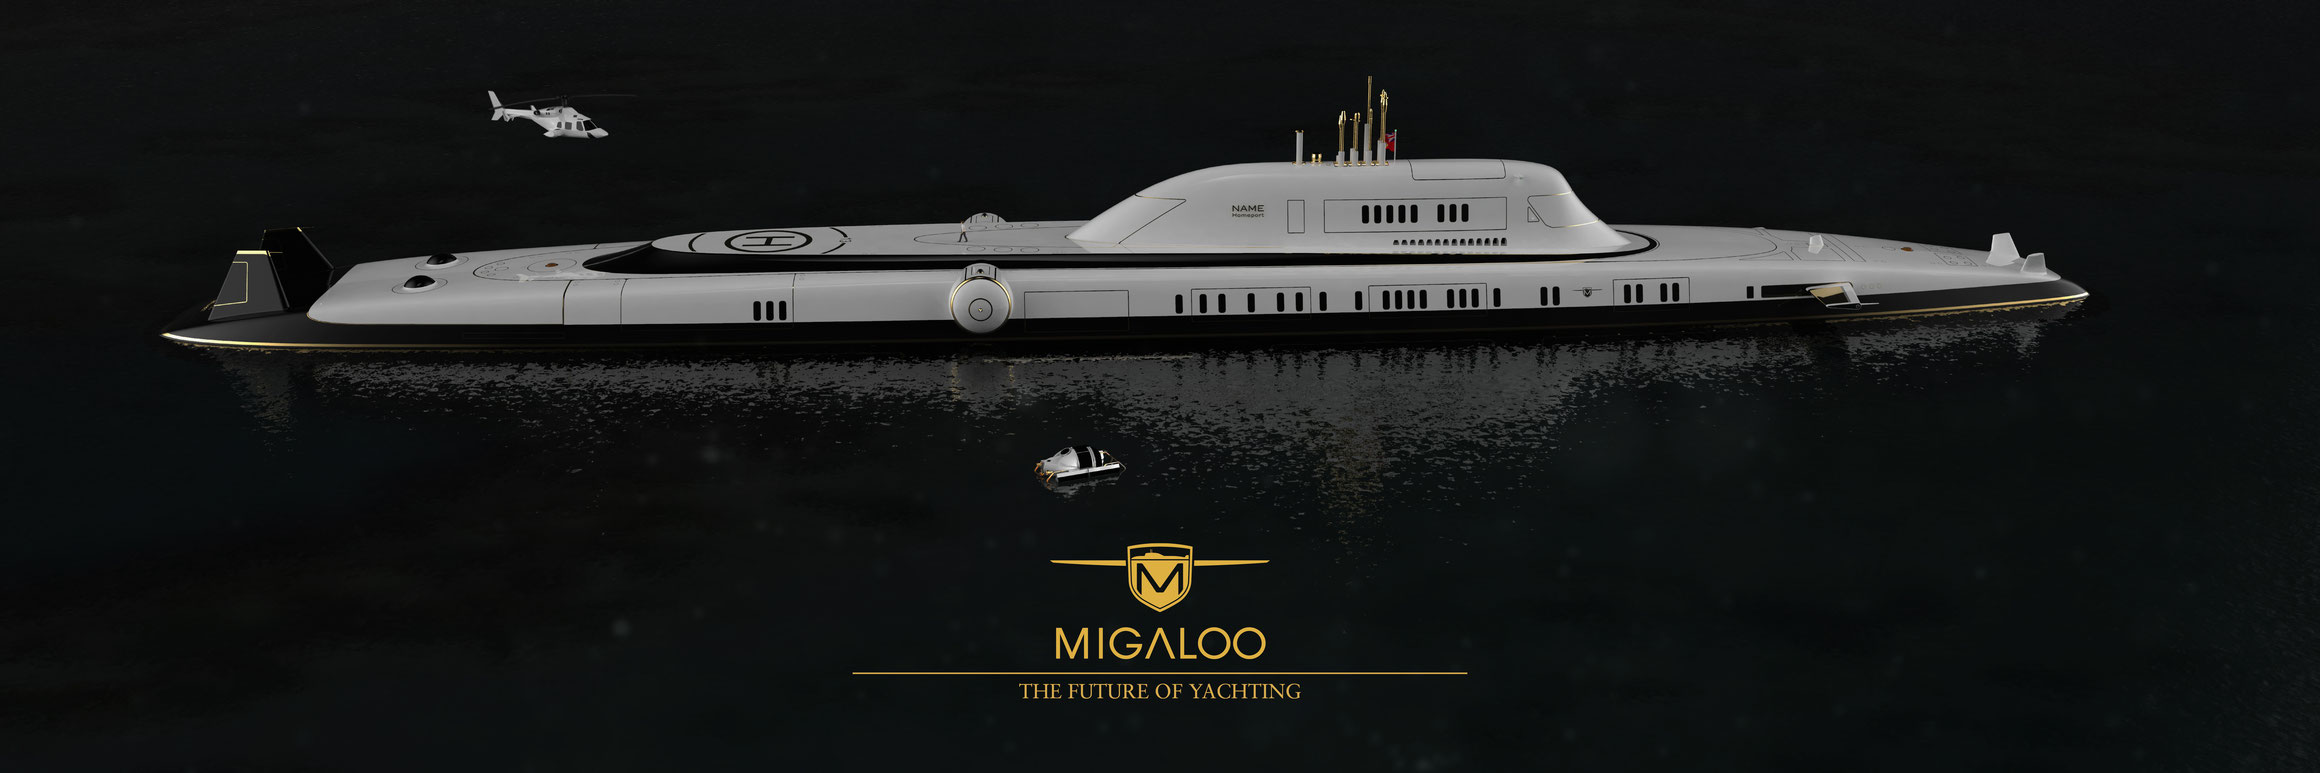 165 m private submersible superyacht